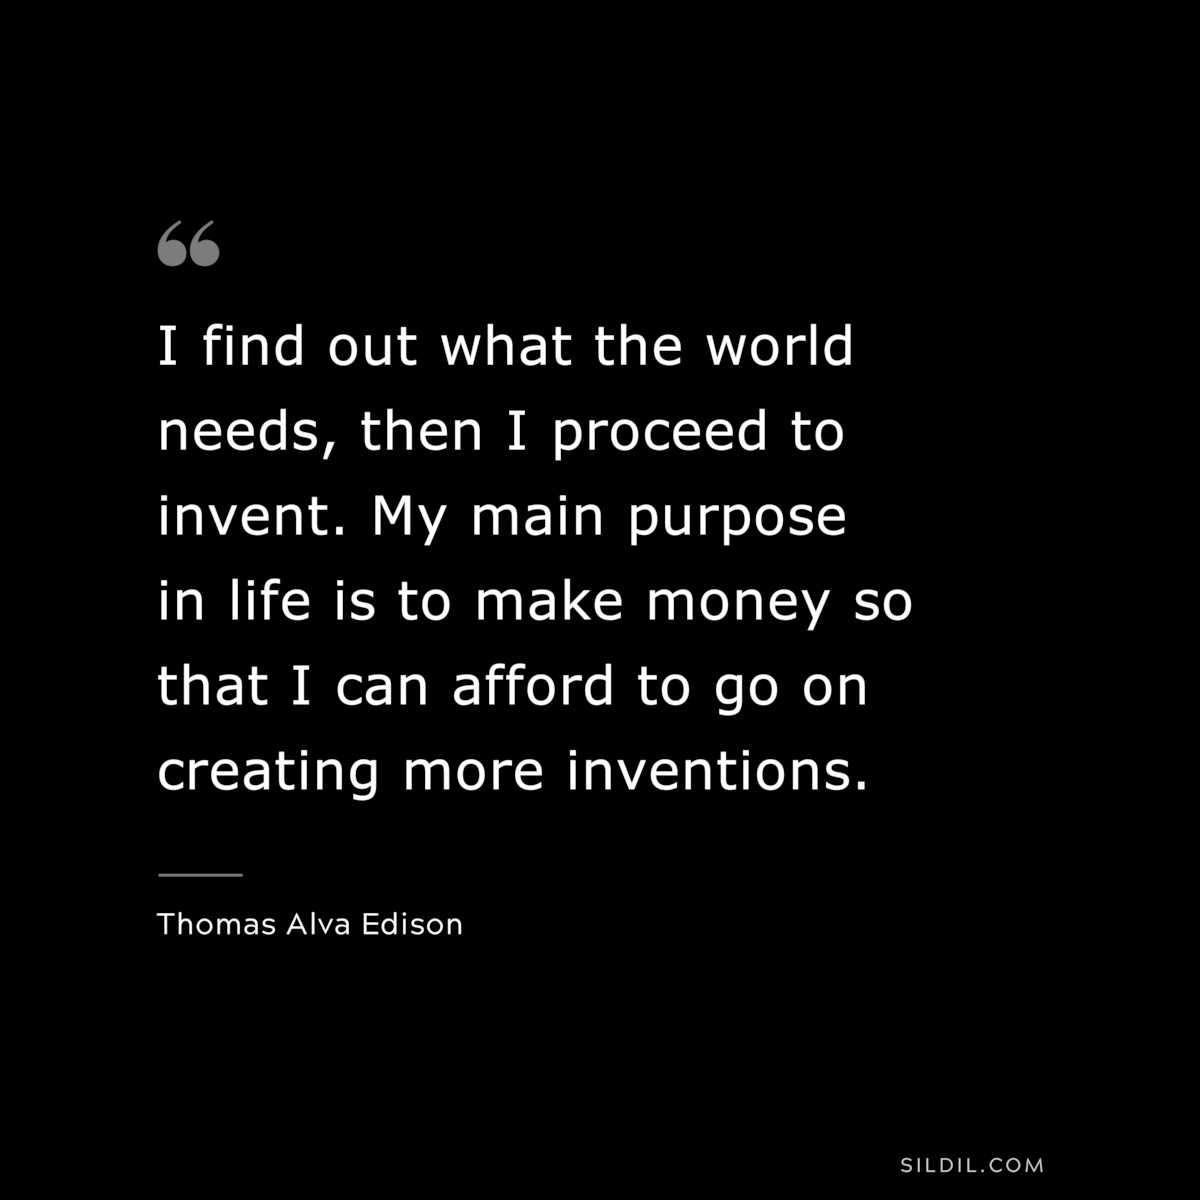 I find out what the world needs, then I proceed to invent. My main purpose in life is to make money so that I can afford to go on creating more inventions. ― Thomas Alva Edison